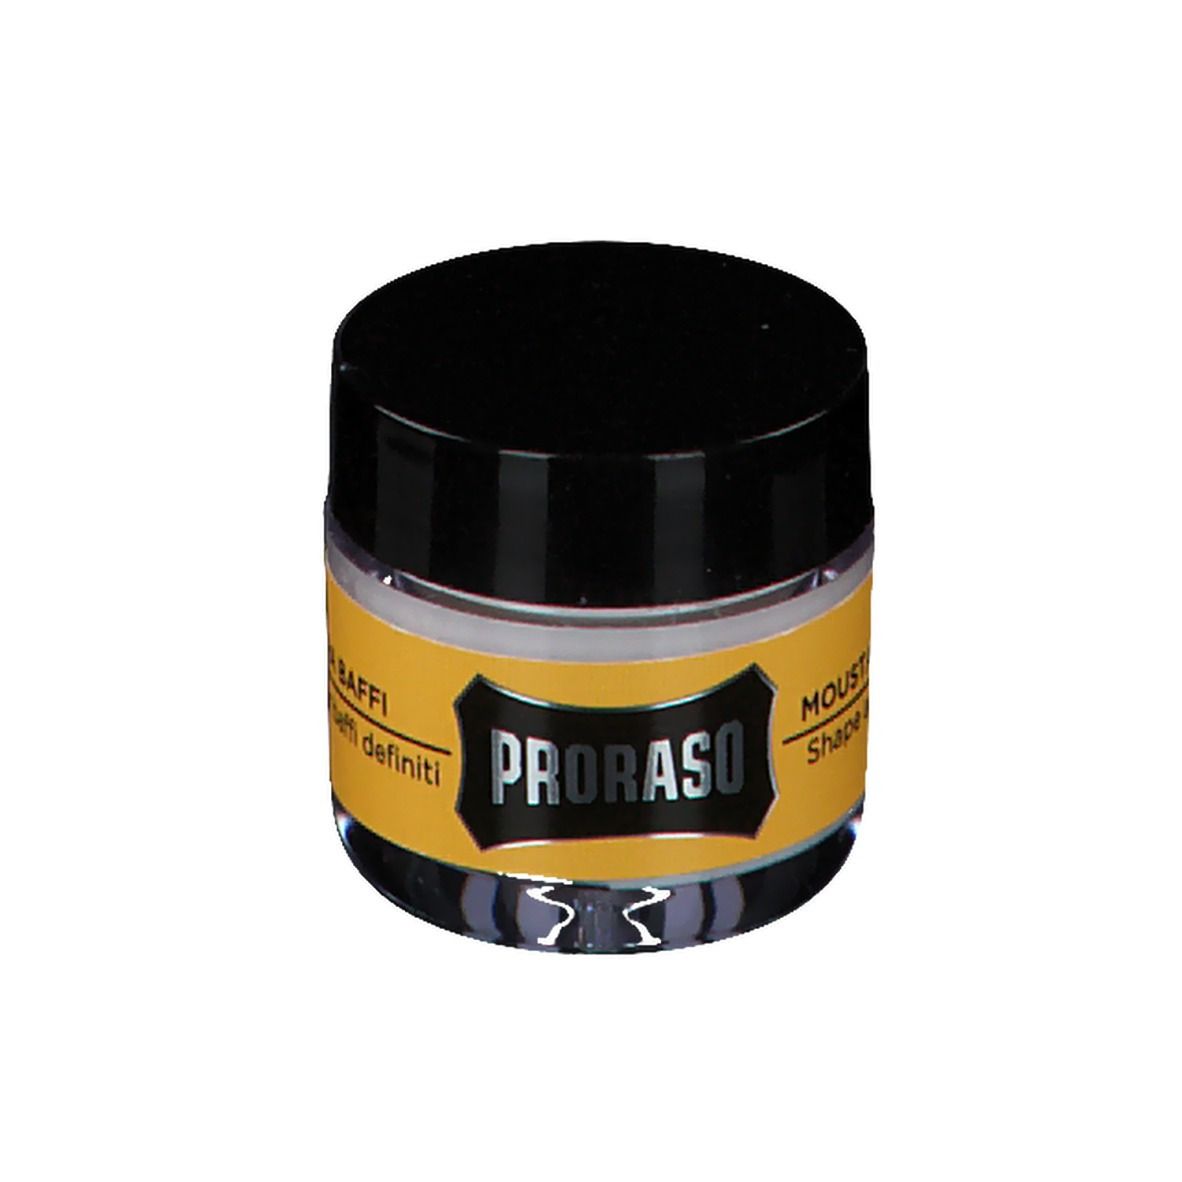 PRORASO Moustache Wax Wood and Spice